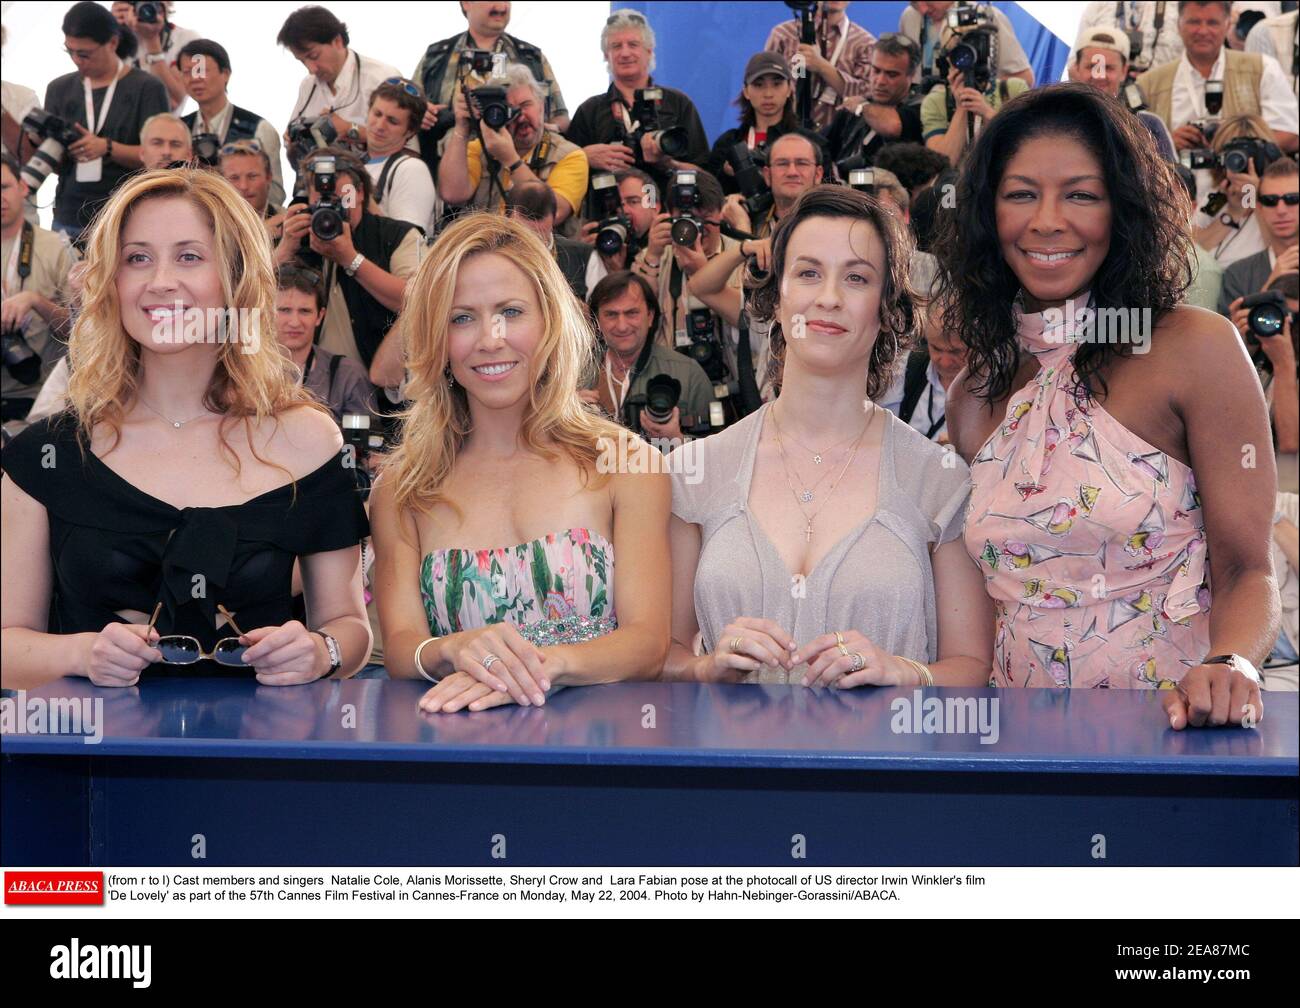 (from r to l) Cast members and singers Natalie Cole, Alanis Morissette, Sheryl Crow and Lara Fabian pose at the photocall of US director Irwin Winkler's film 'De Lovely' as part of the 57th Cannes Film Festival in Cannes-France on Monday, May 22, 2004. Photo by Hahn-Nebinger-Gorassini/ABACA. Stock Photo